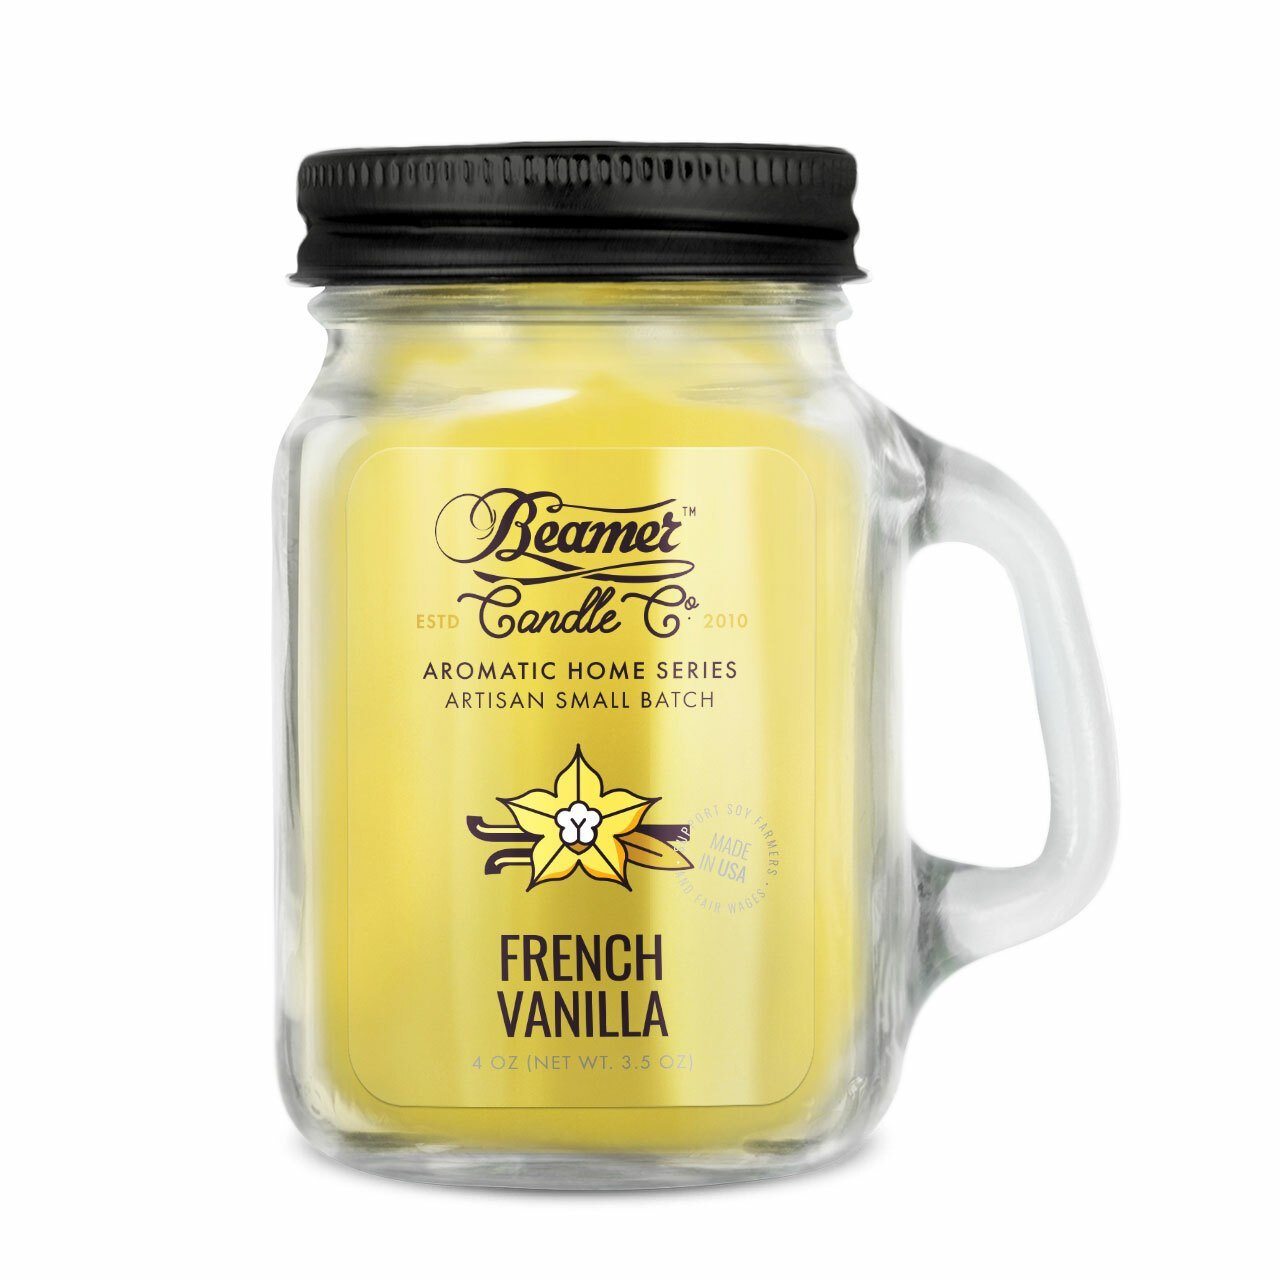 Beamer Candle Co - Aromatic Home Series - 4oz Mason Jar - Various Scents - (1 Count) Flower Power Packages French Vanilla 